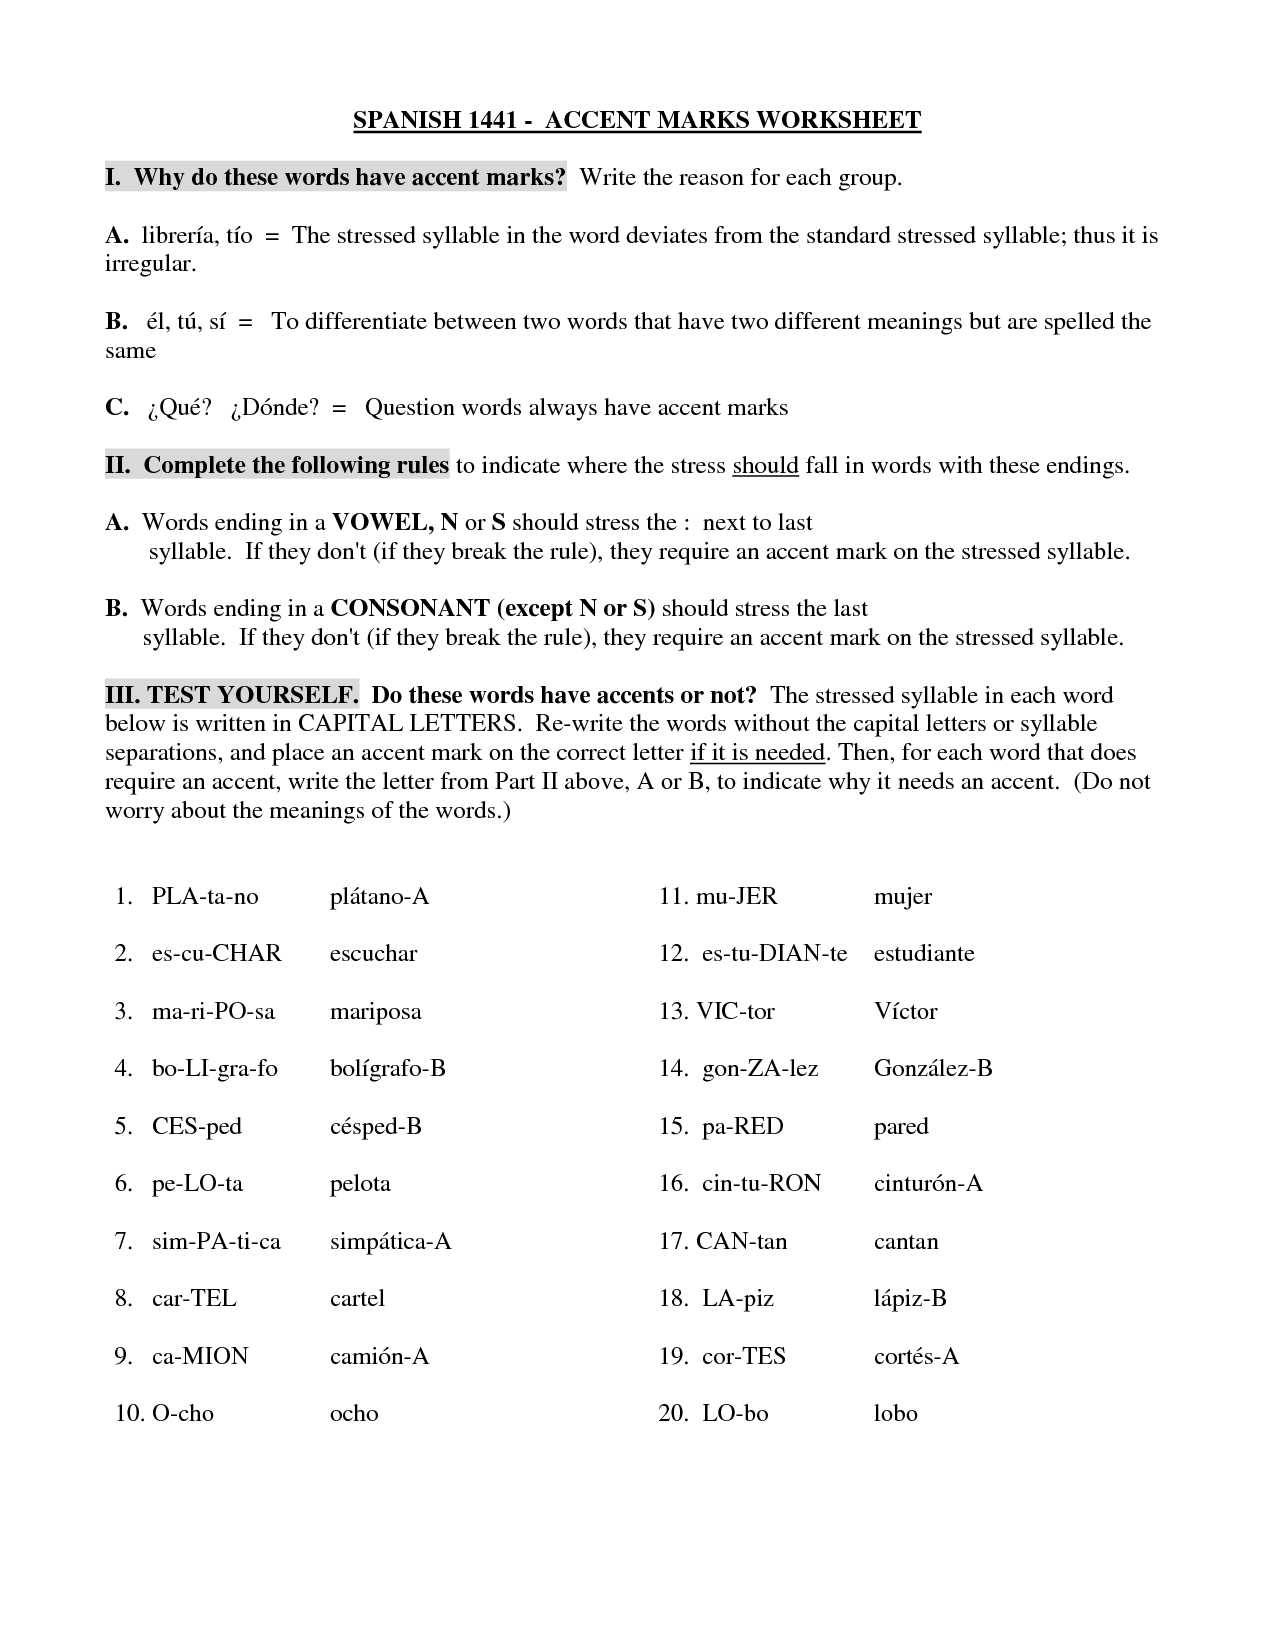 Spanish Accents Worksheet